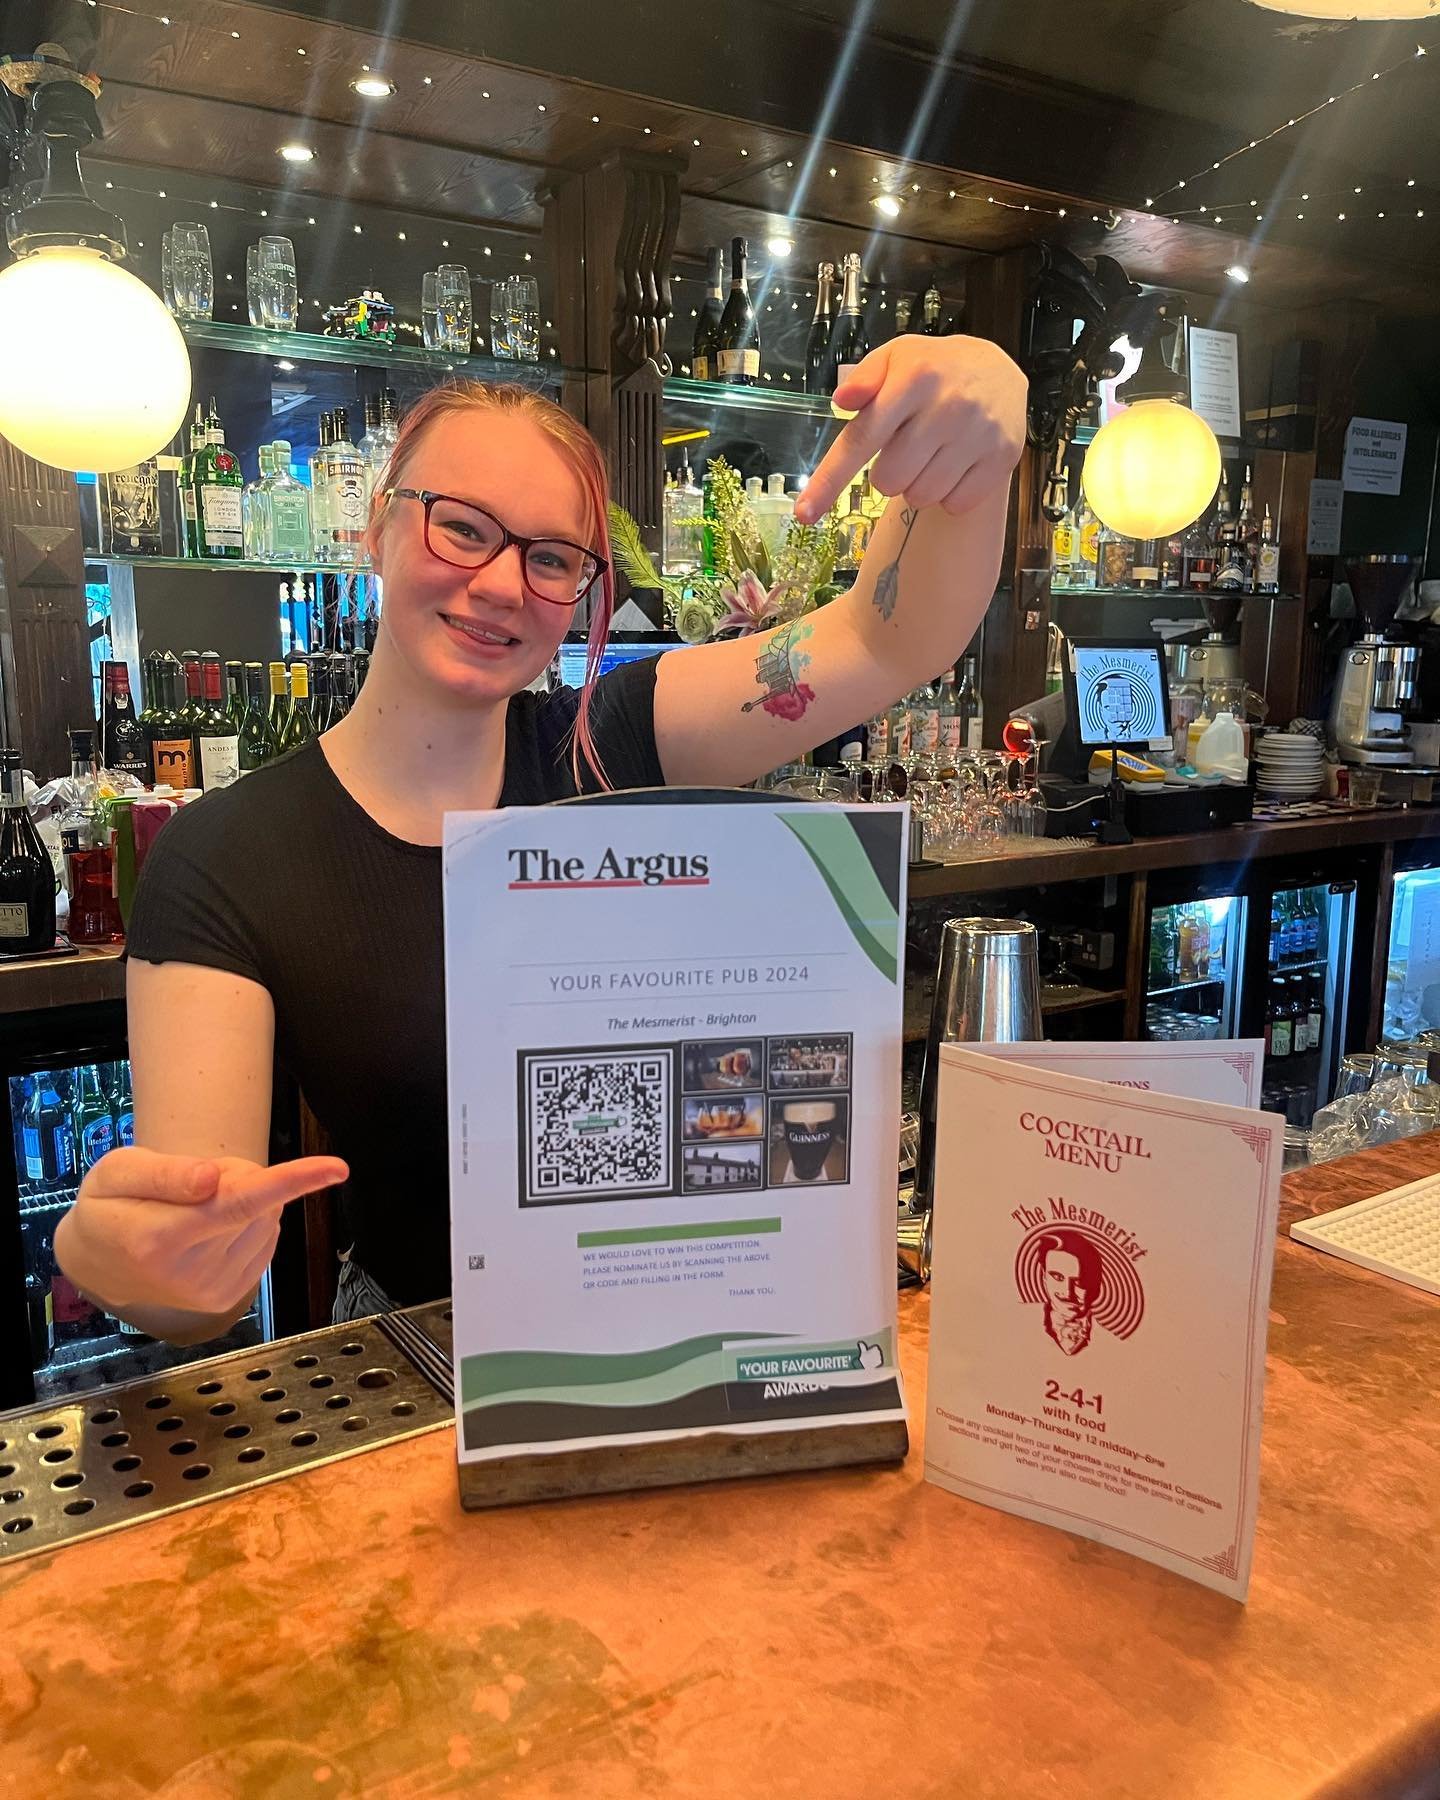 VOTE FOR US! 

Choose the Mes as your favourite pub for 2024 with the Argus &lsquo;Favourite Pub&rsquo; awards ✨

We love our customers and appreciate any feedback we get, but this award would be extra special! Scan the QR code at the bar on your nex